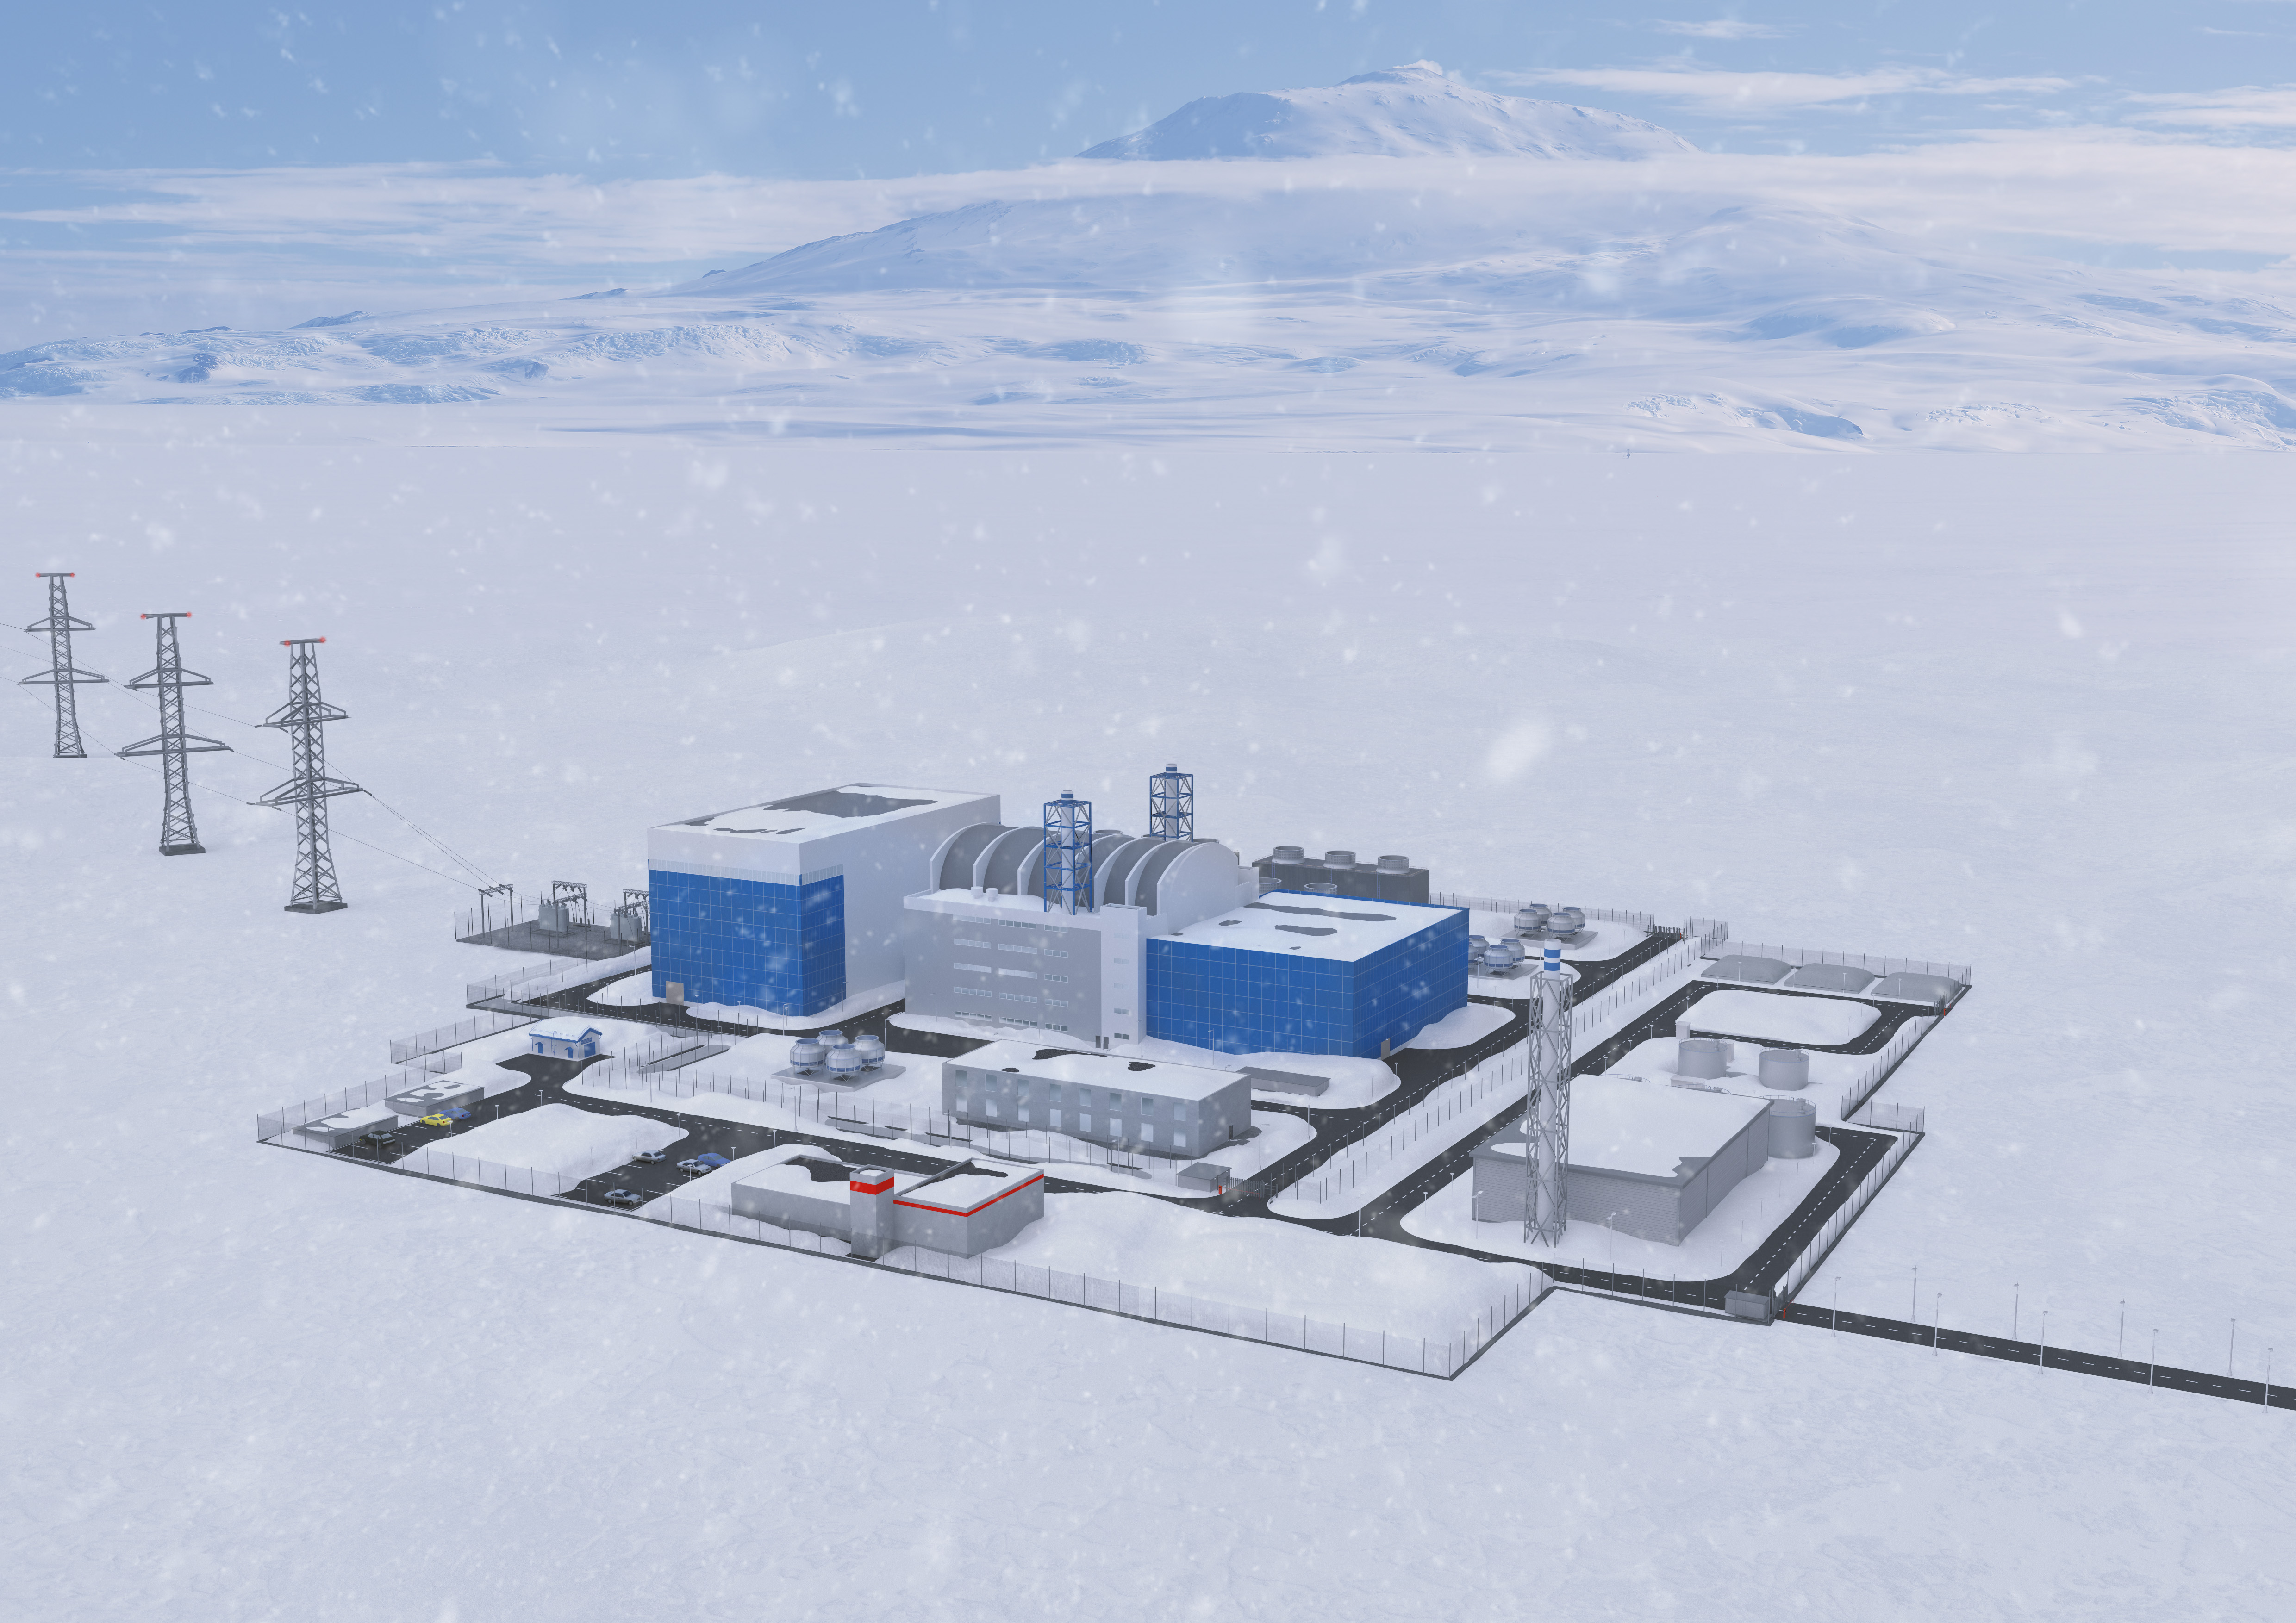 General view of the nuclear power plant with SMR RITM-200N (© The Association of Indigenous Peoples of the North of Sakha Republic (Yakutia))